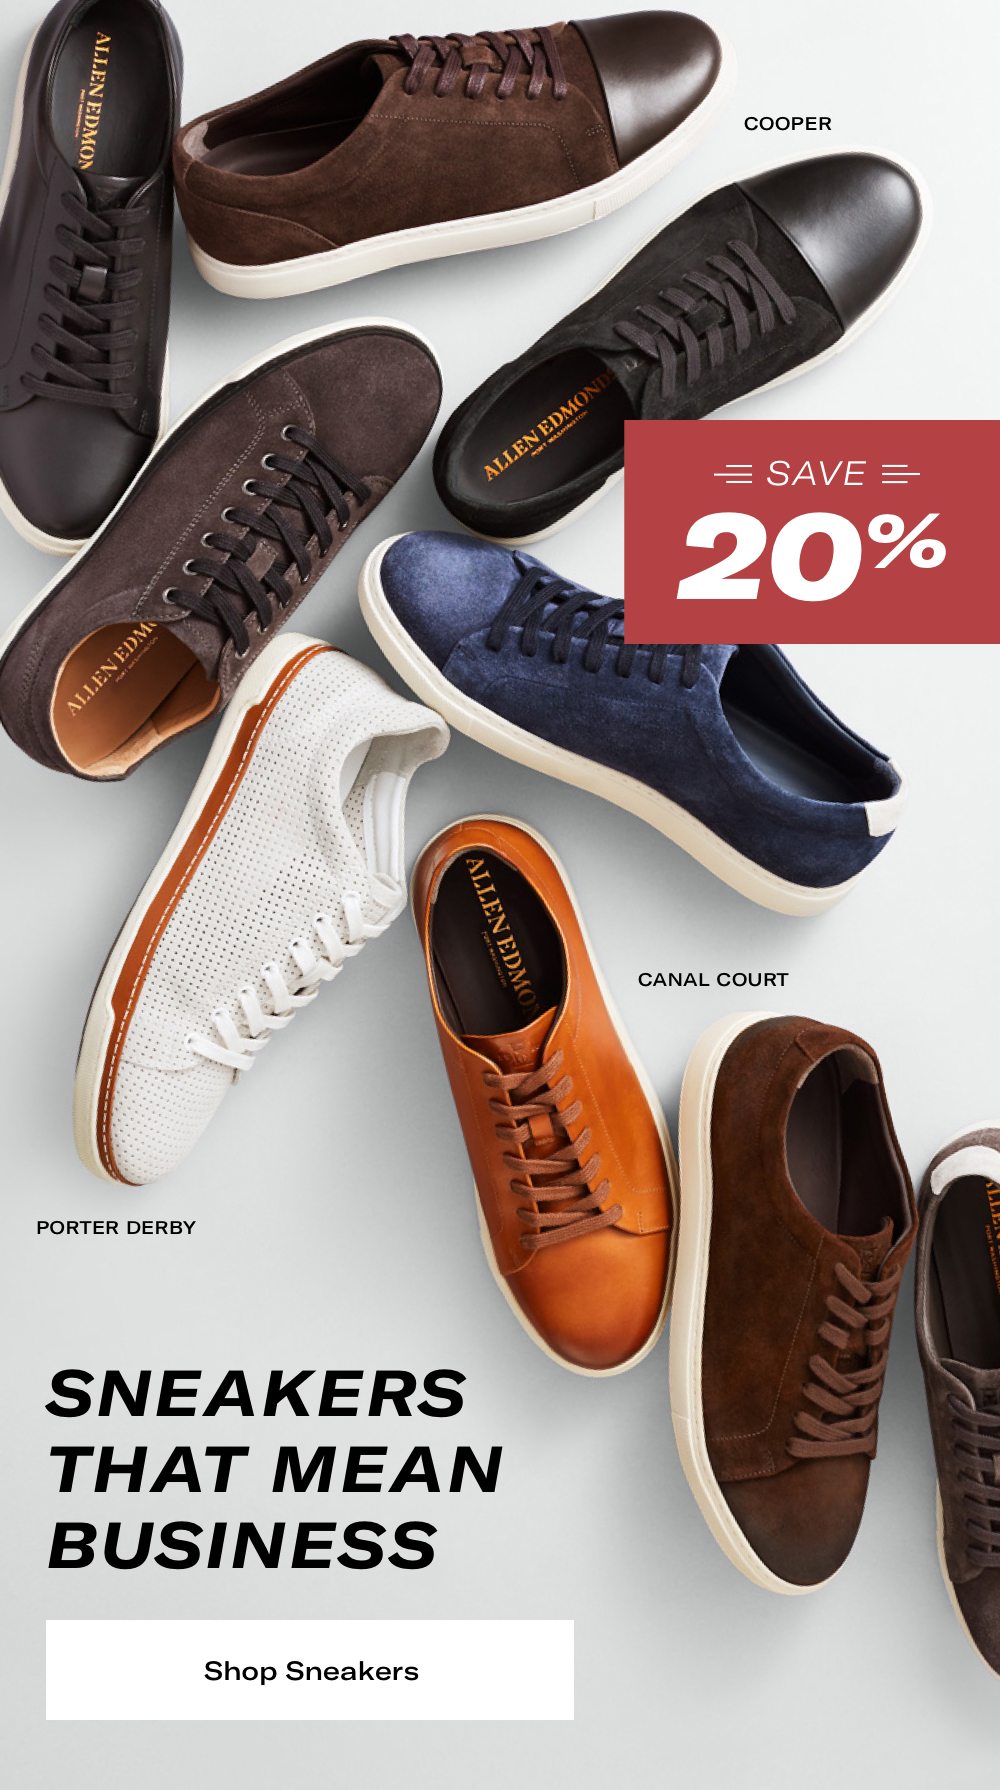 Sneakers That Mean Business. Save 20% on Sneakers